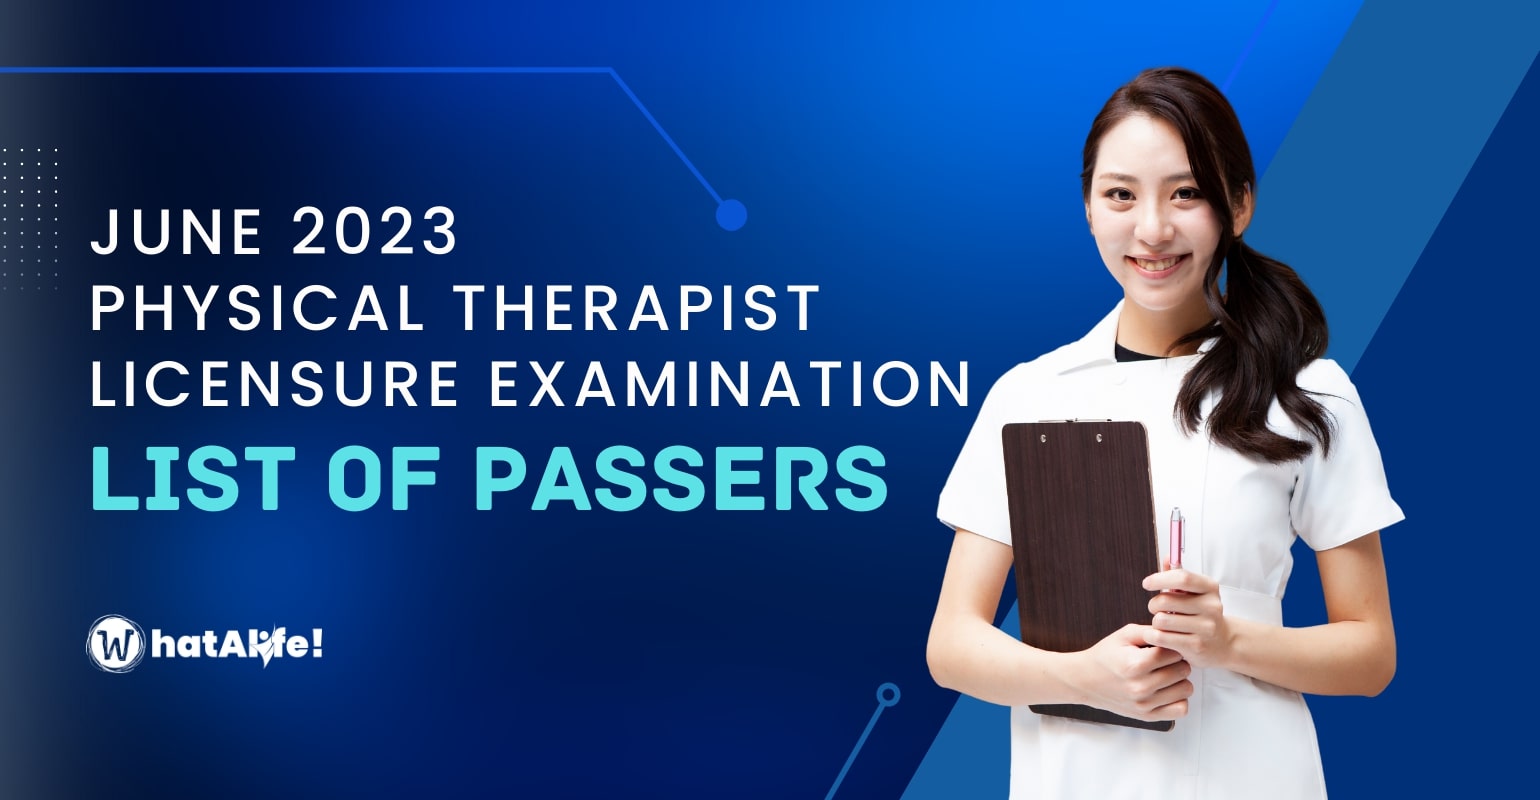 Full List of Passers — June 2023 Occupational Therapist Licensure Exam Results